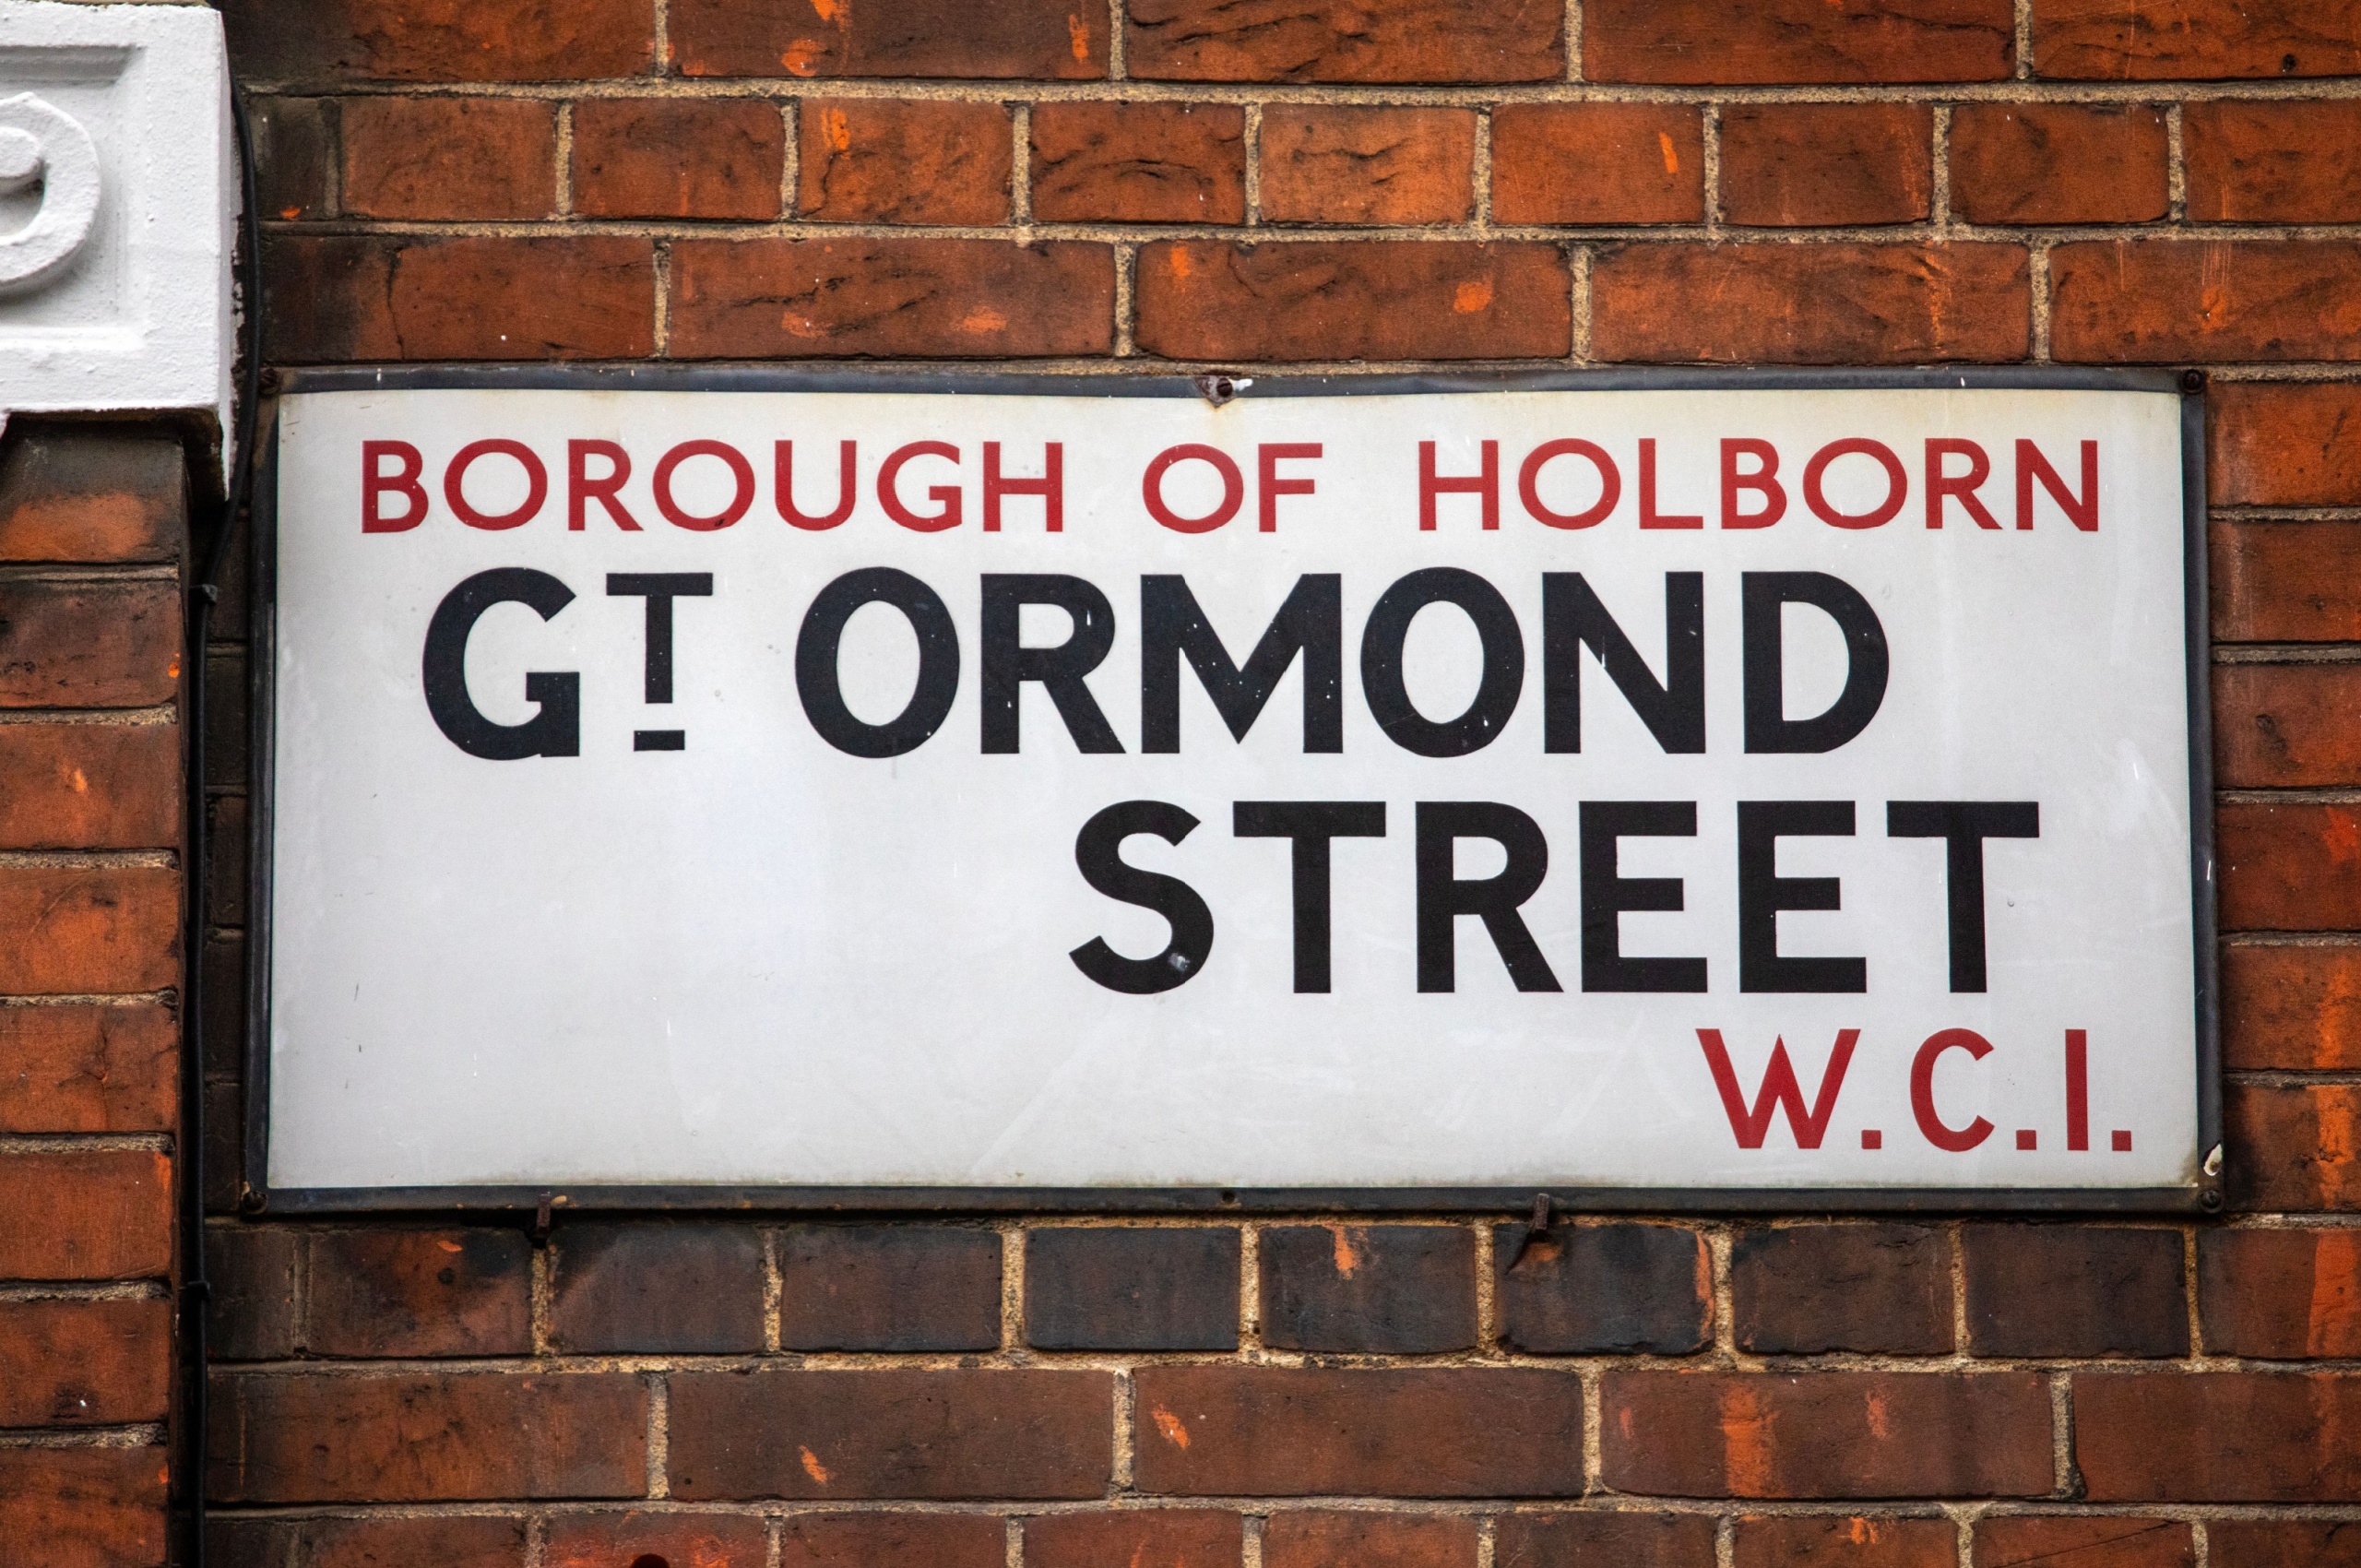 A street sign for Great Ormond Street, London